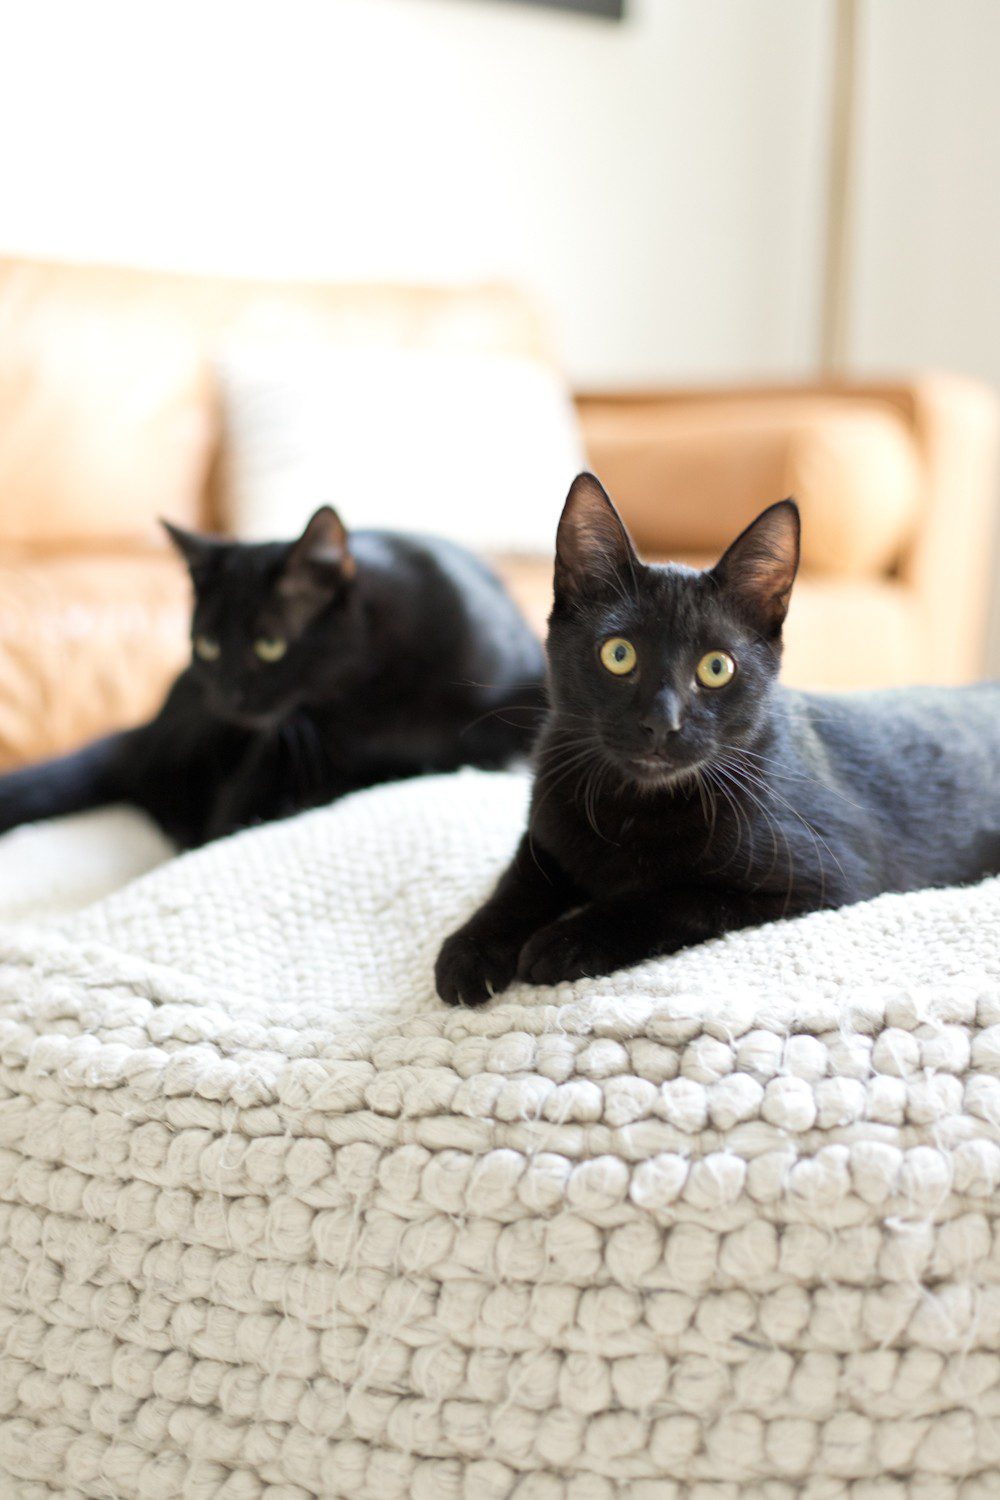 Kitten Care Tips: 5 Essentials you Need to Raise a Cat by popular lifestyel blogger Tabitha Blue of Fresh Mommy Blog: image of two black cats sitting on a cream woven floor ottoman in front of a camel colored leather couch with mud cloth throw pillows.